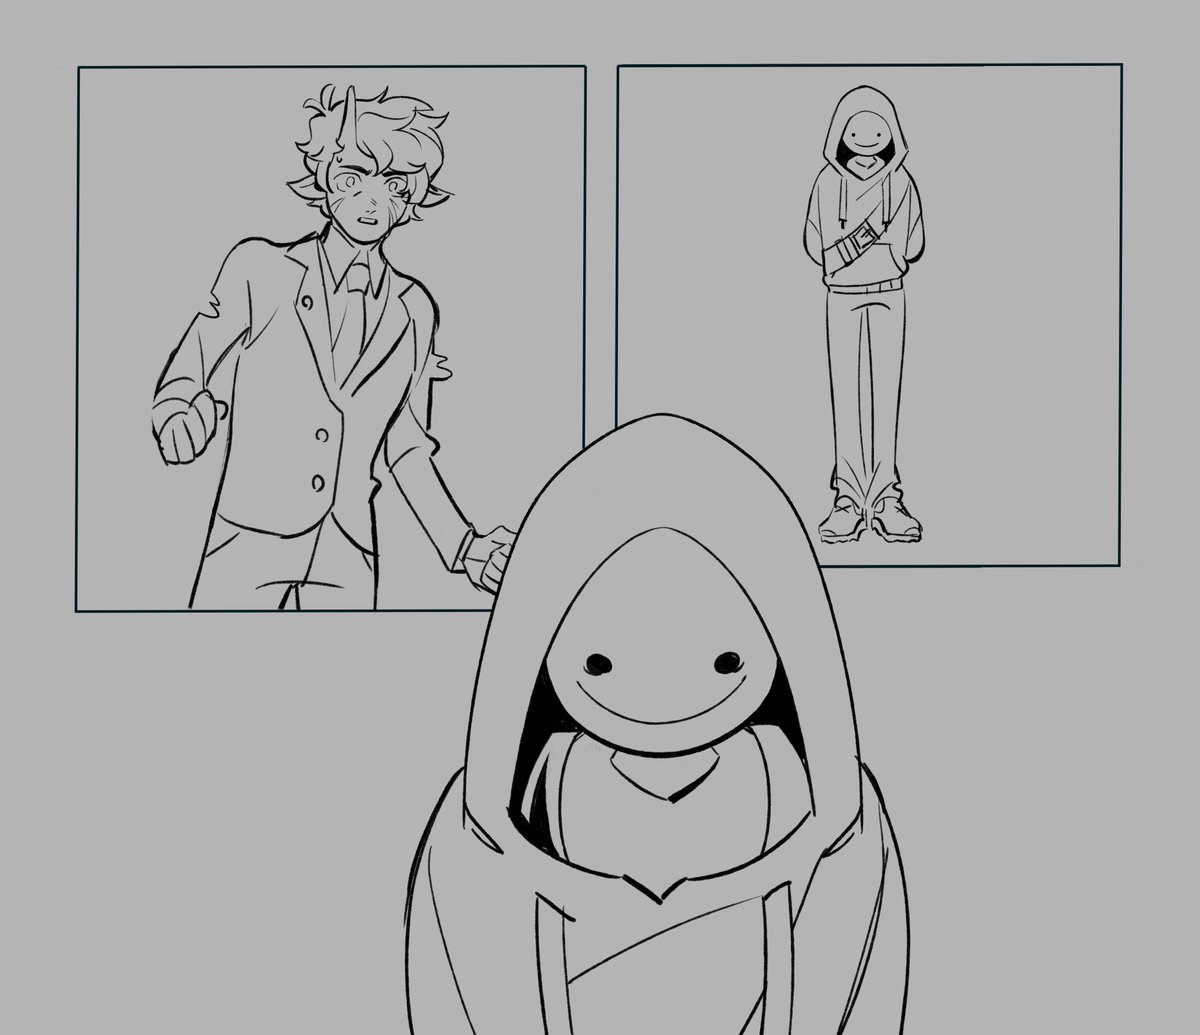 comic that i started last year, but never got around to finishing it (1/2)
i hope you guys like the angst <3 